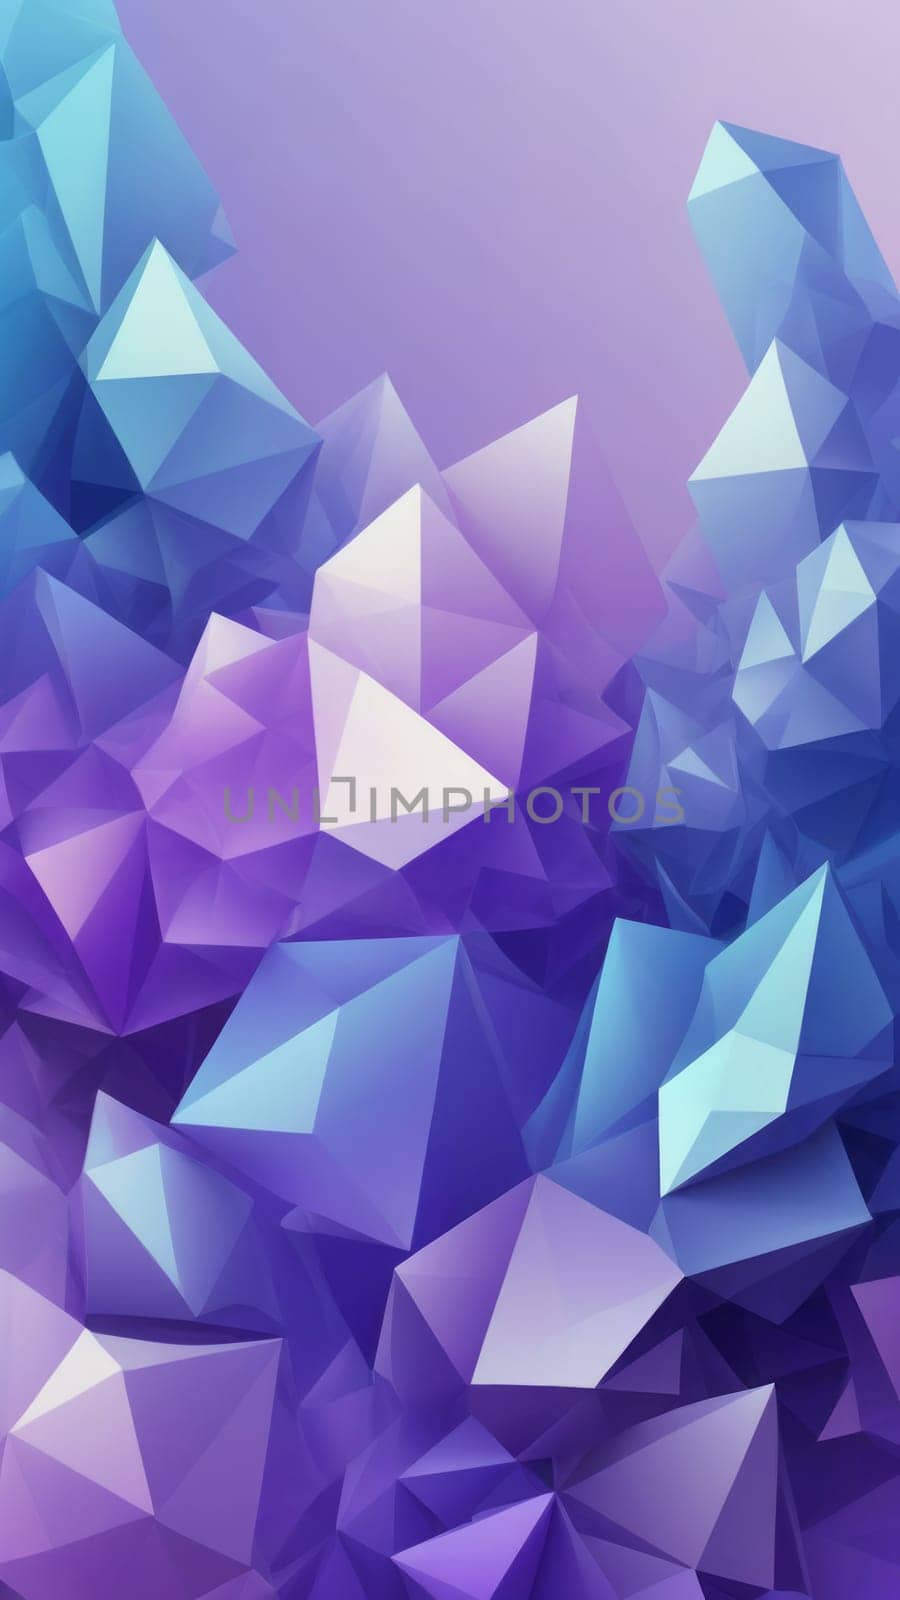 Screen background from Crystalline shapes and blue by nkotlyar